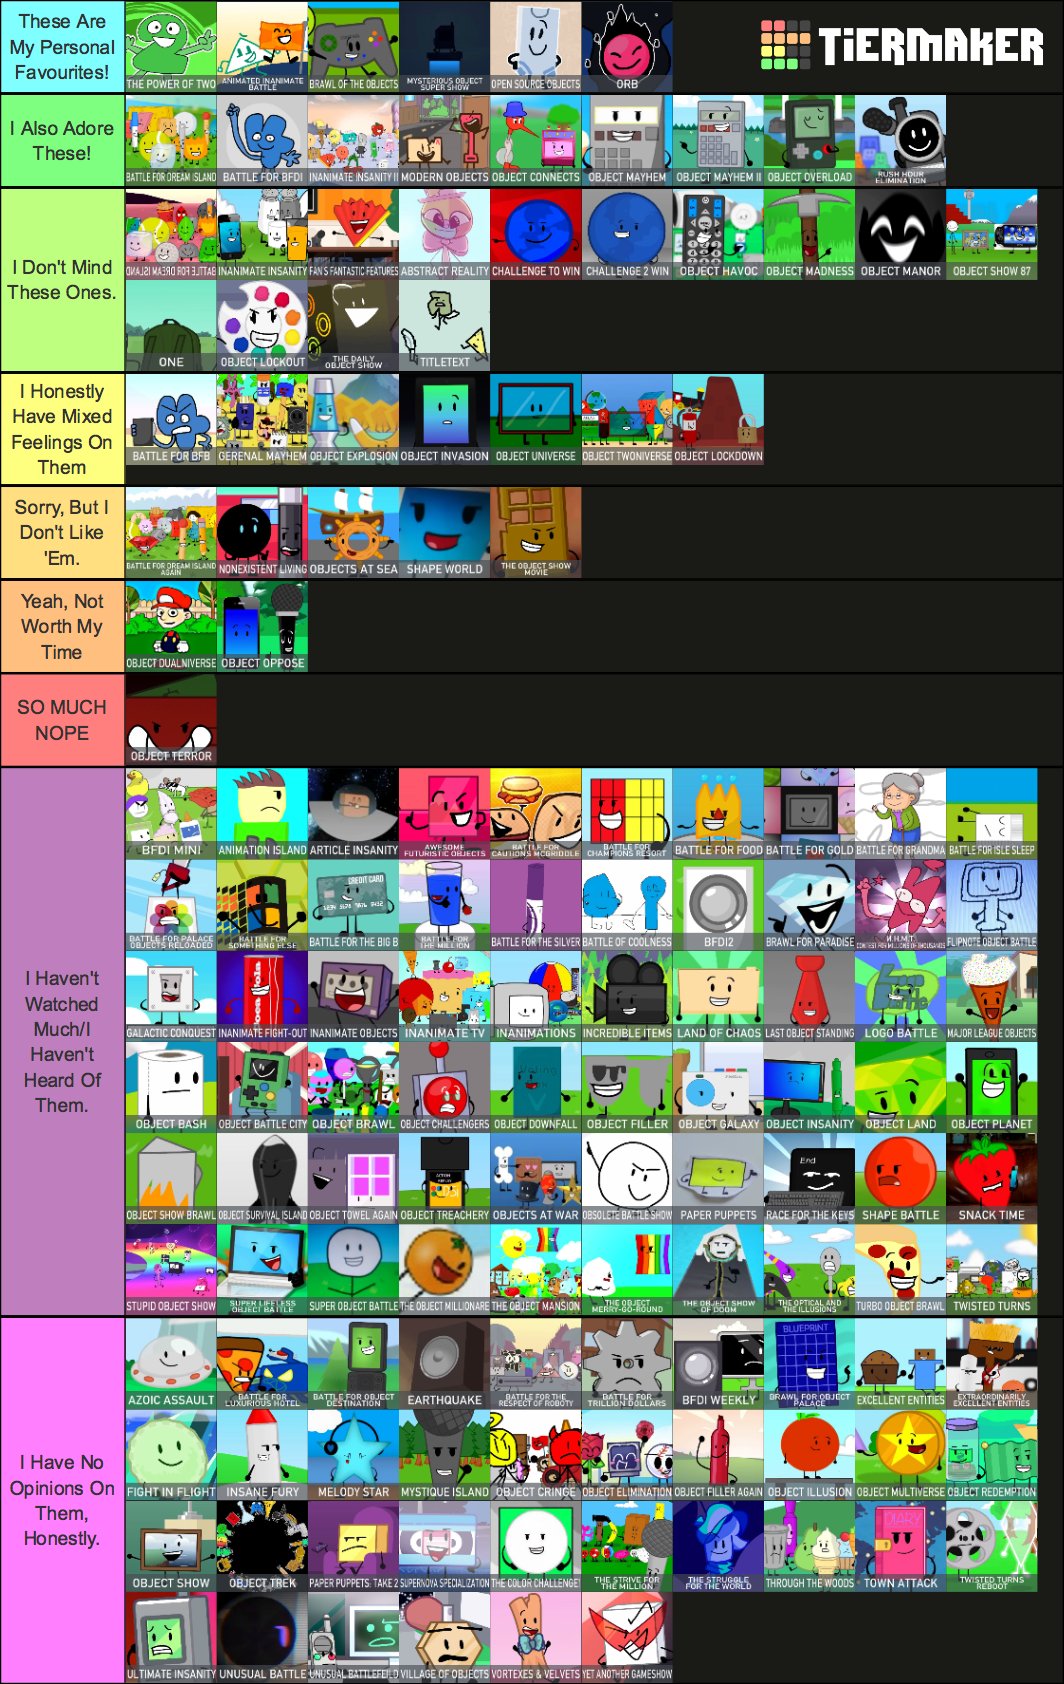 Create a bfdi characters (with hosts) Tier List - TierMaker